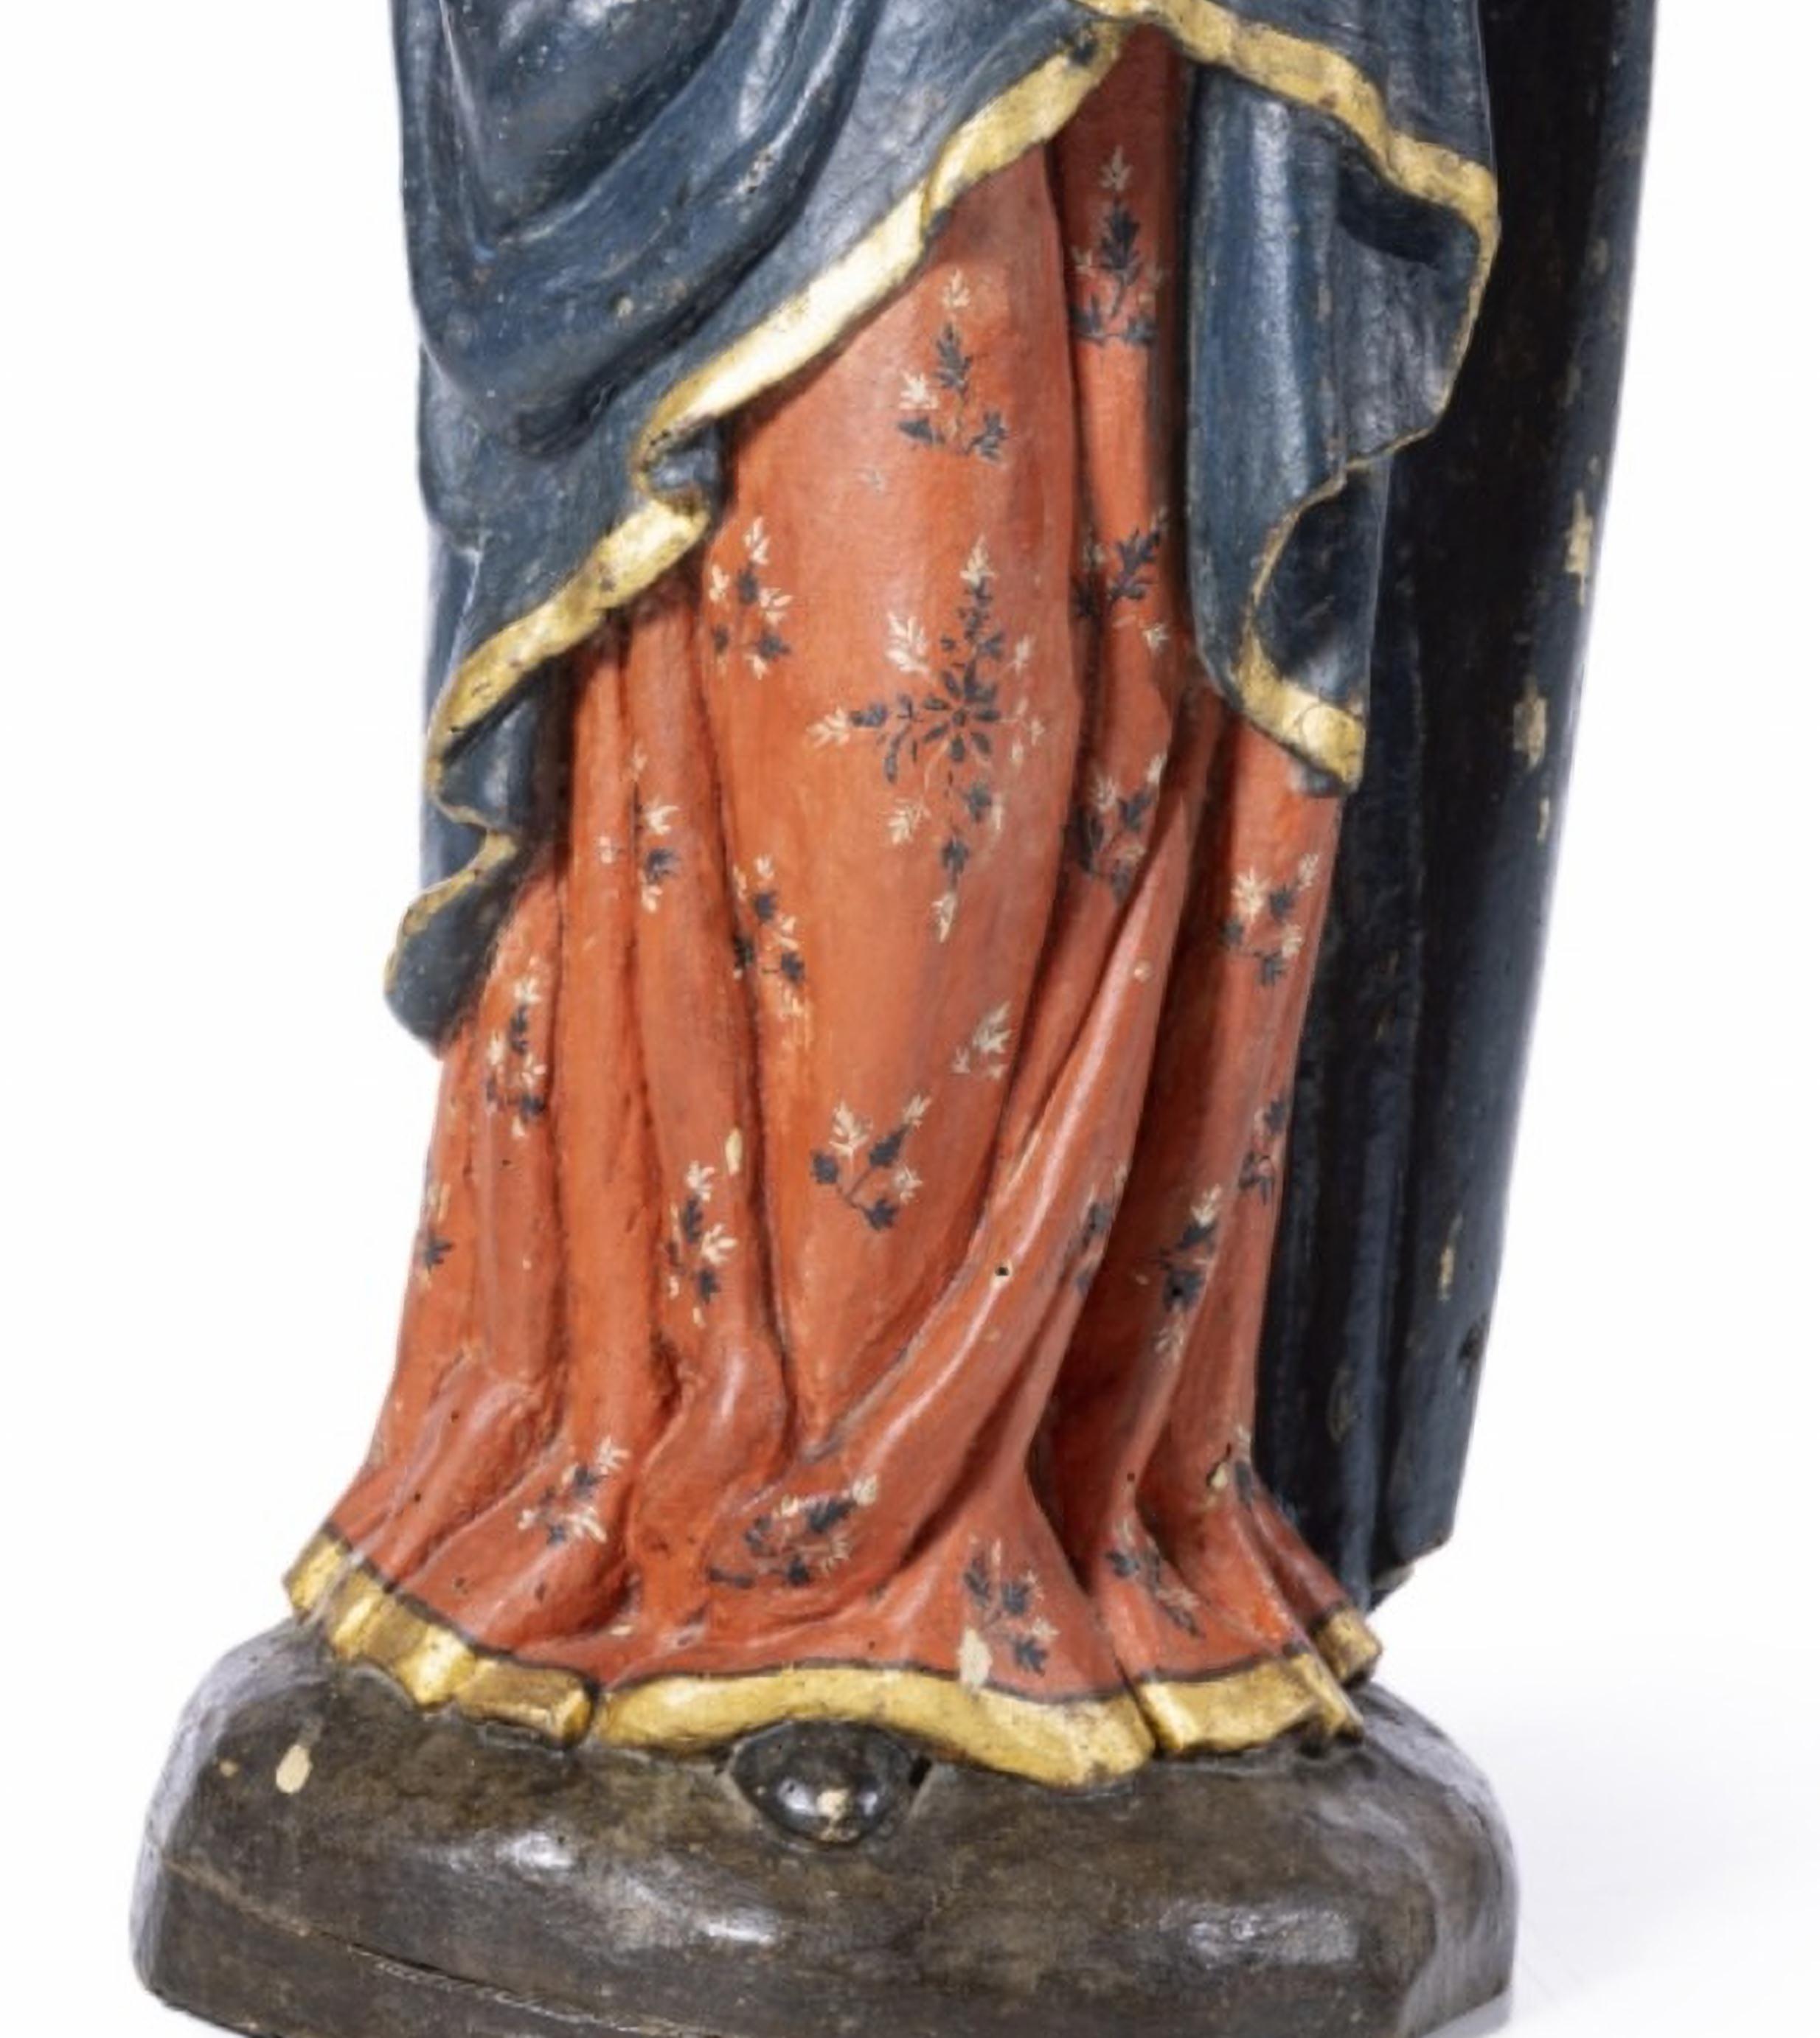 Our lady with child Jesus savior of the world 17th century

Portuguese sculpture 
in polychrome and gilded wood. 
Repaints. 
Height: 71 cm
very good condition.